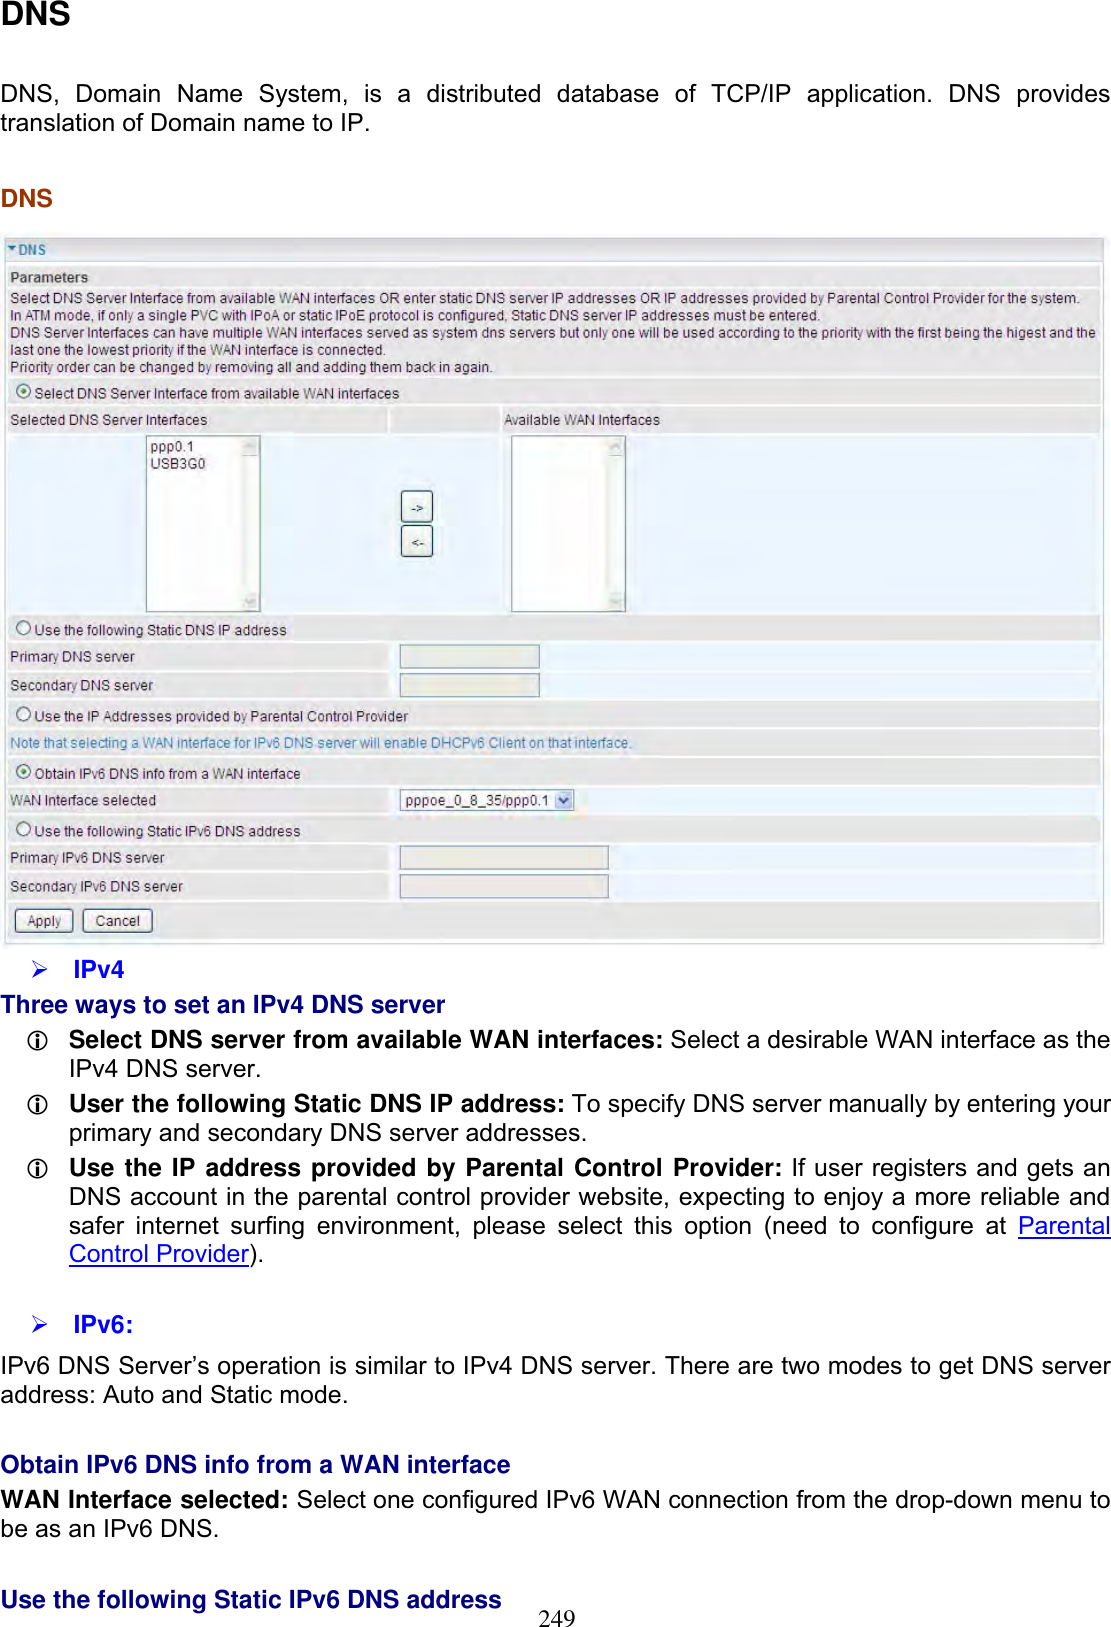 249DNSDNS, Domain Name System, is a distributed database of TCP/IP application. DNS provides translation of Domain name to IP.DNS¾IPv4Three ways to set an IPv4 DNS server LSelect DNS server from available WAN interfaces: Select a desirable WAN interface as the IPv4 DNS server. LUser the following Static DNS IP address: To specify DNS server manually by entering your primary and secondary DNS server addresses. LUse the IP address provided by Parental Control Provider: If user registers and gets an DNS account in the parental control provider website, expecting to enjoy a more reliable and safer internet surfing environment, please select this option (need to configure at Parental Control Provider).¾IPv6:IPv6 DNS Server’s operation is similar to IPv4 DNS server. There are two modes to get DNS server address: Auto and Static mode. Obtain IPv6 DNS info from a WAN interface WAN Interface selected: Select one configured IPv6 WAN connection from the drop-down menu to be as an IPv6 DNS.Use the following Static IPv6 DNS address 